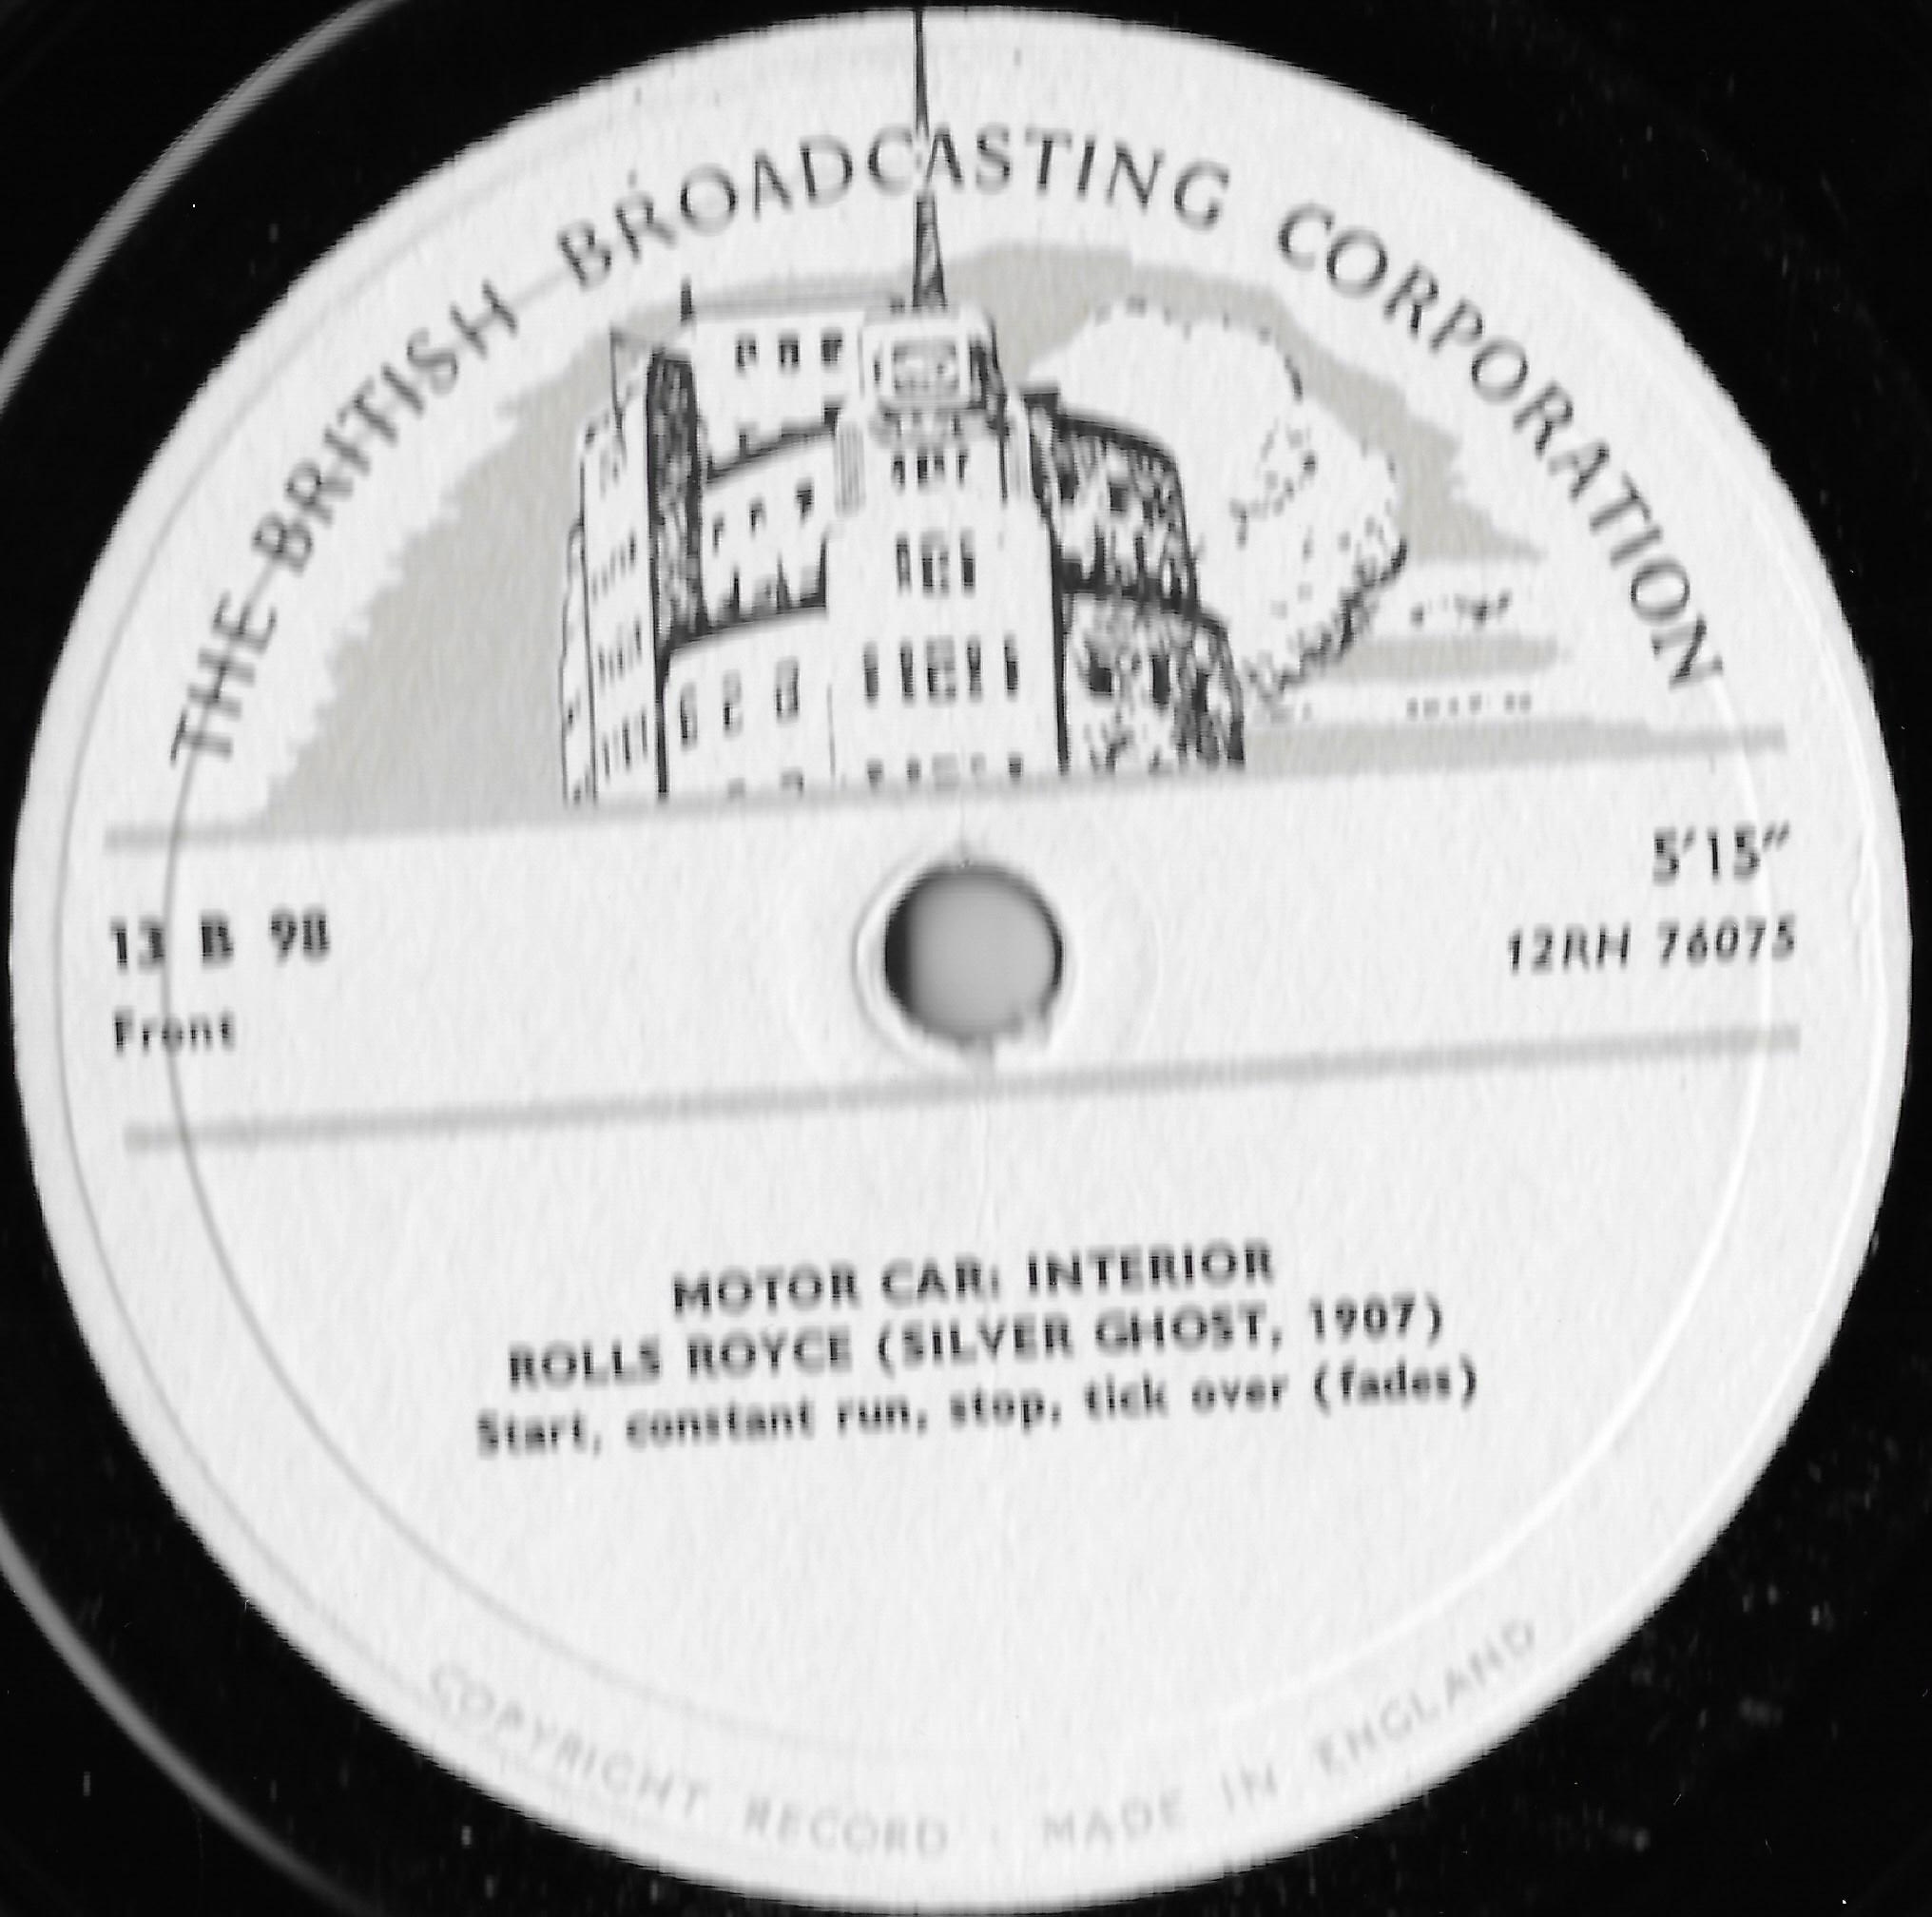 BBC Sound Effects_old label